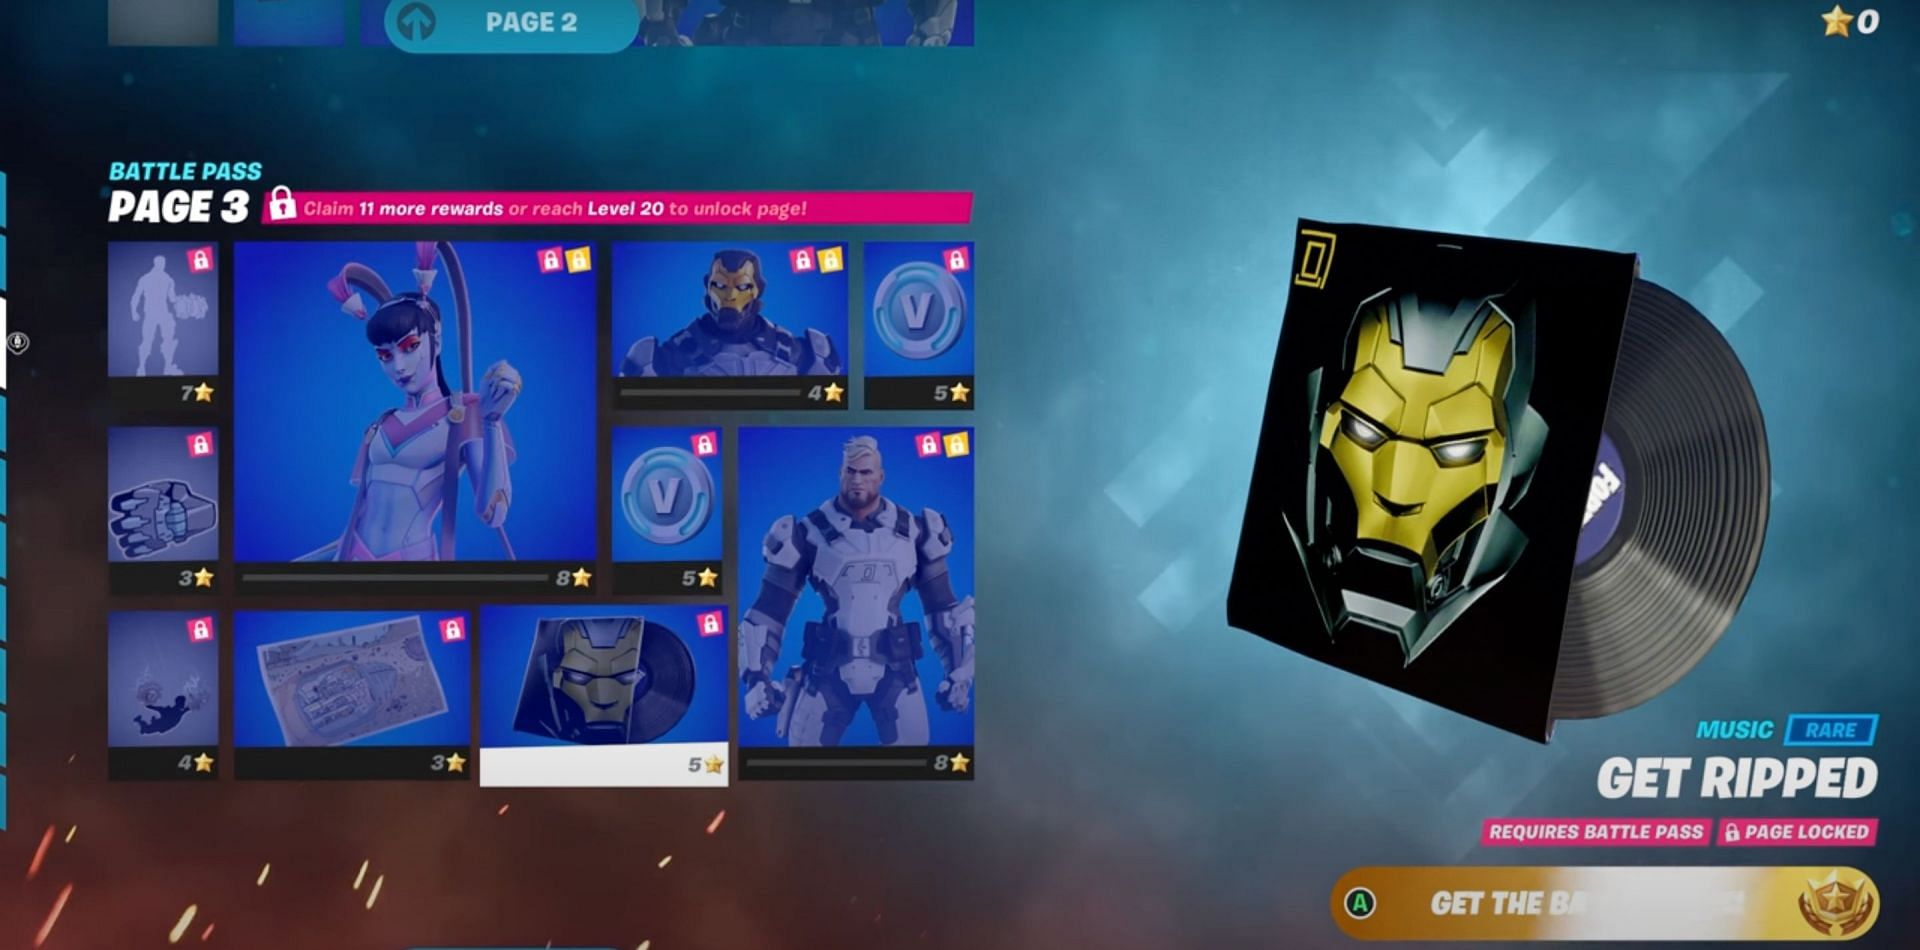 Page 3 of the Battle Pass (Image via Epic Games)